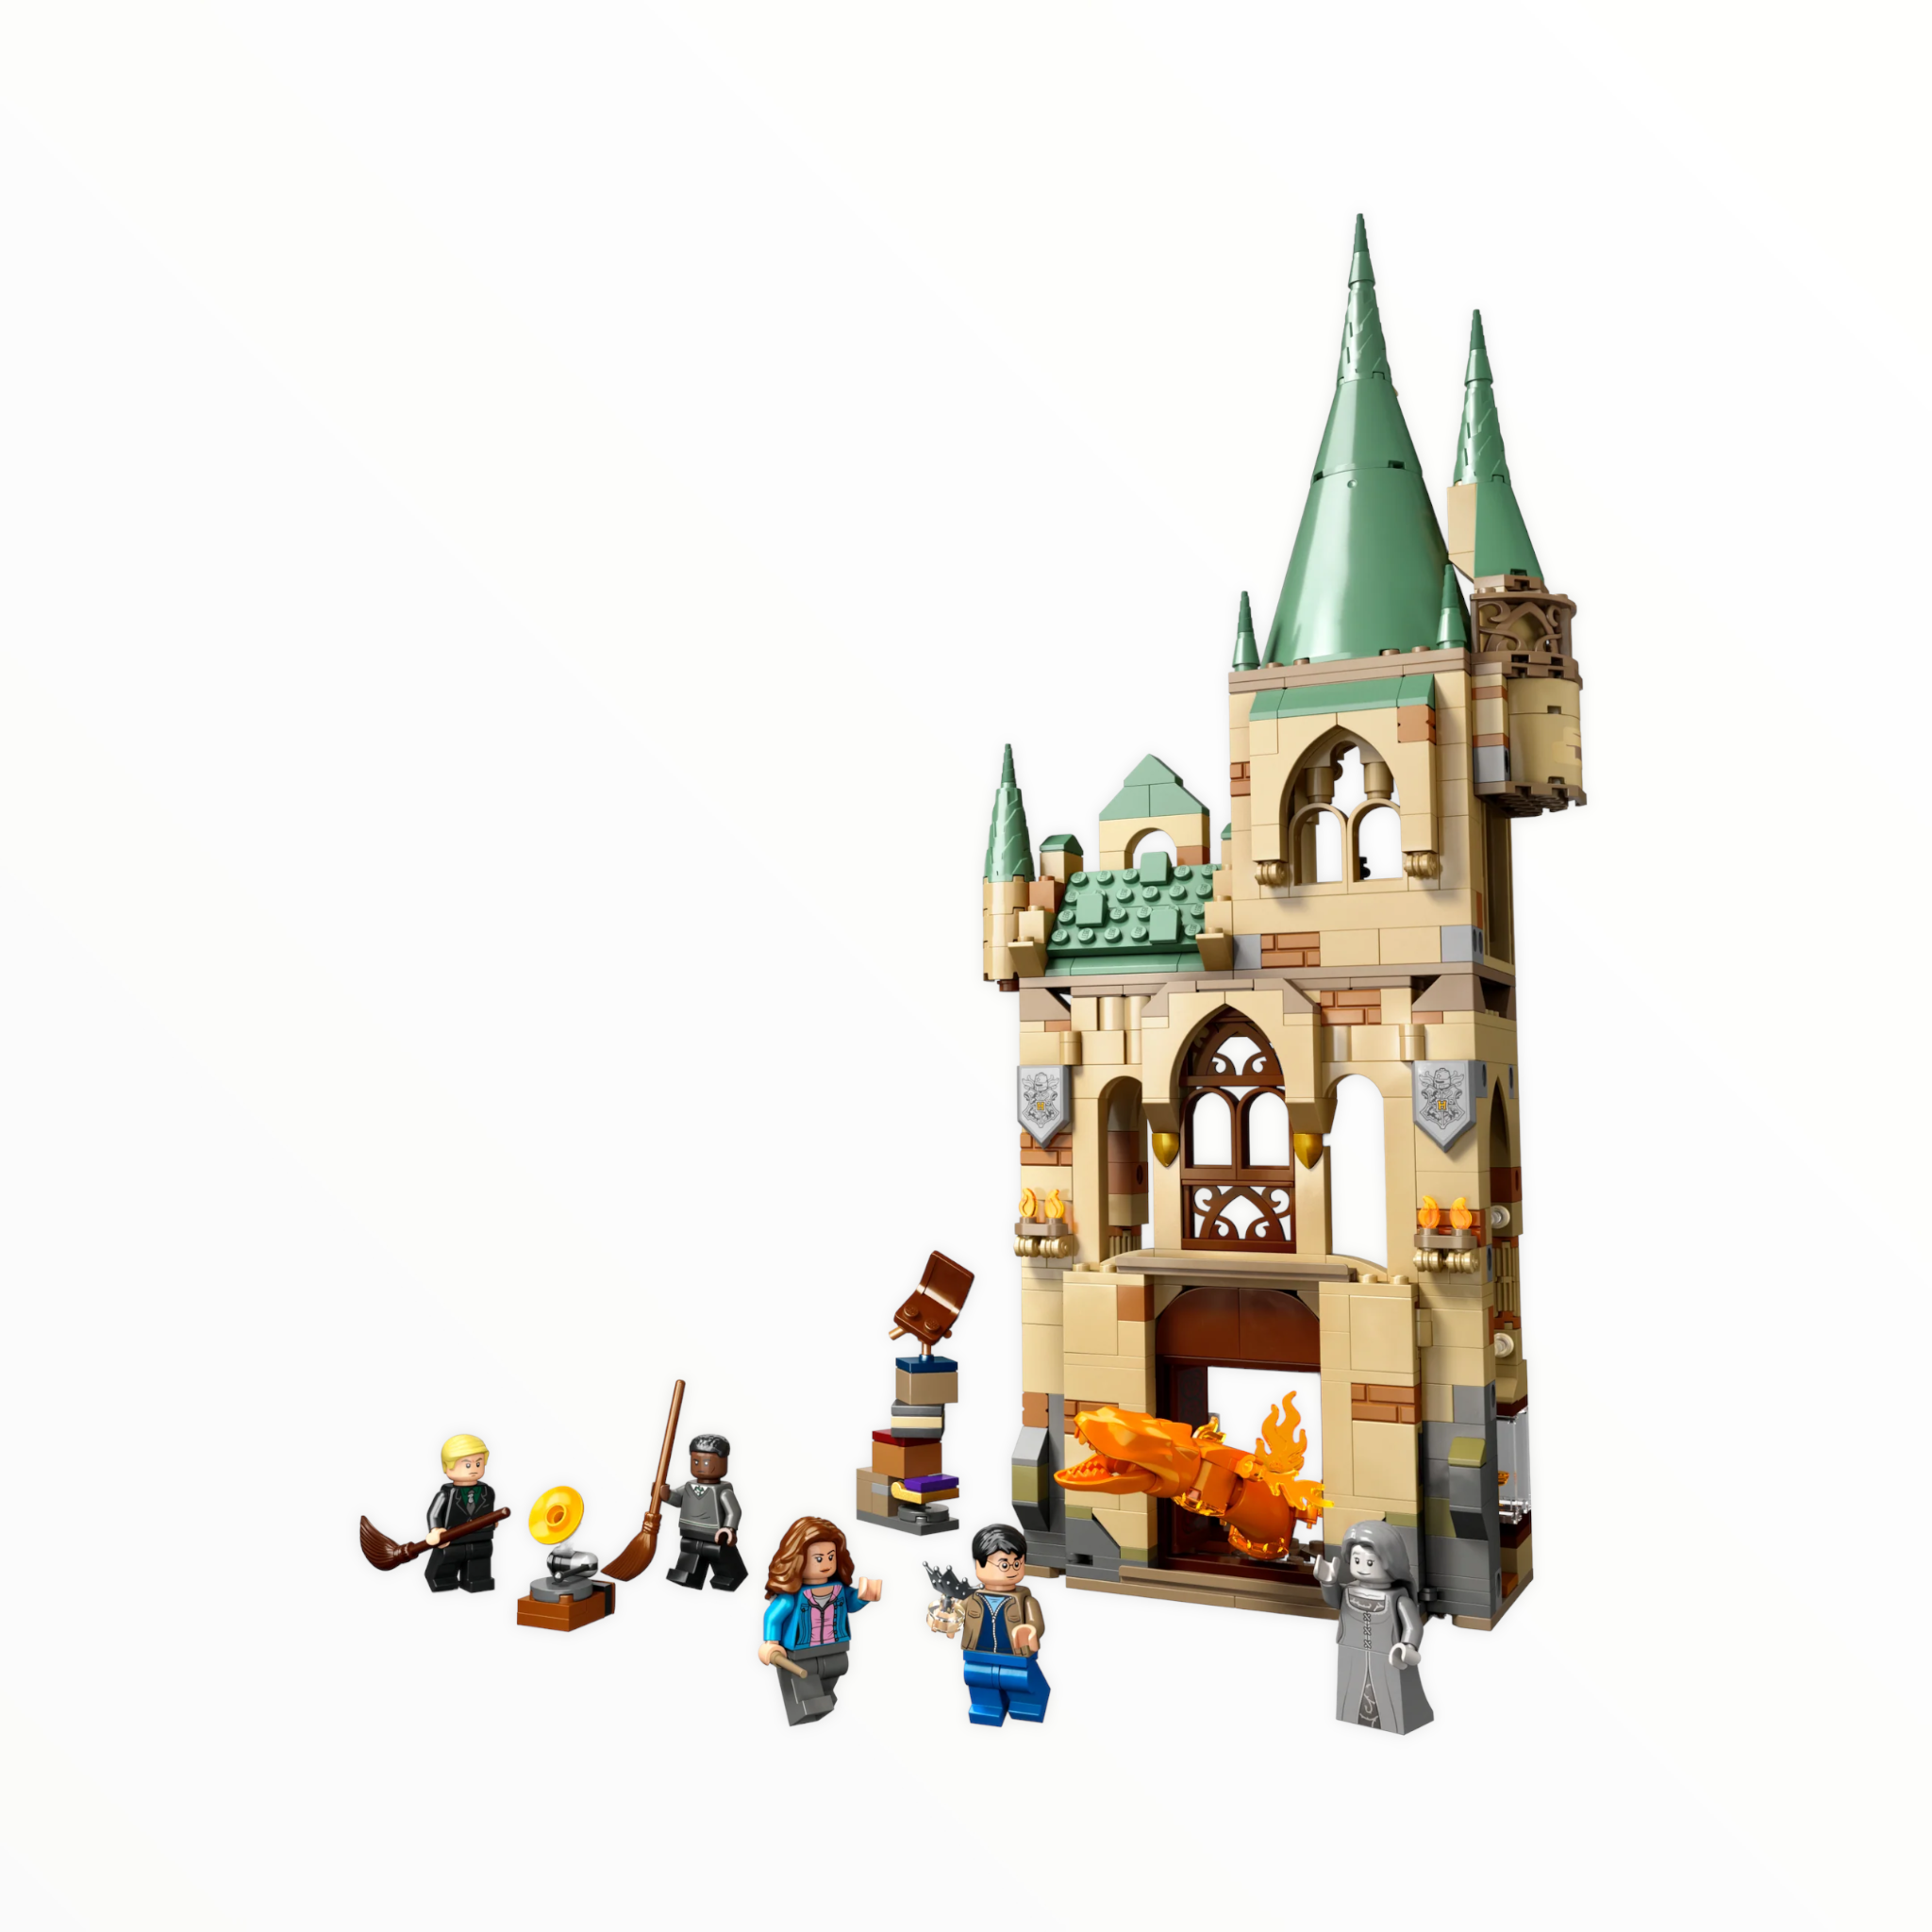 76413 Harry Potter Hogwarts: Room of Requirement